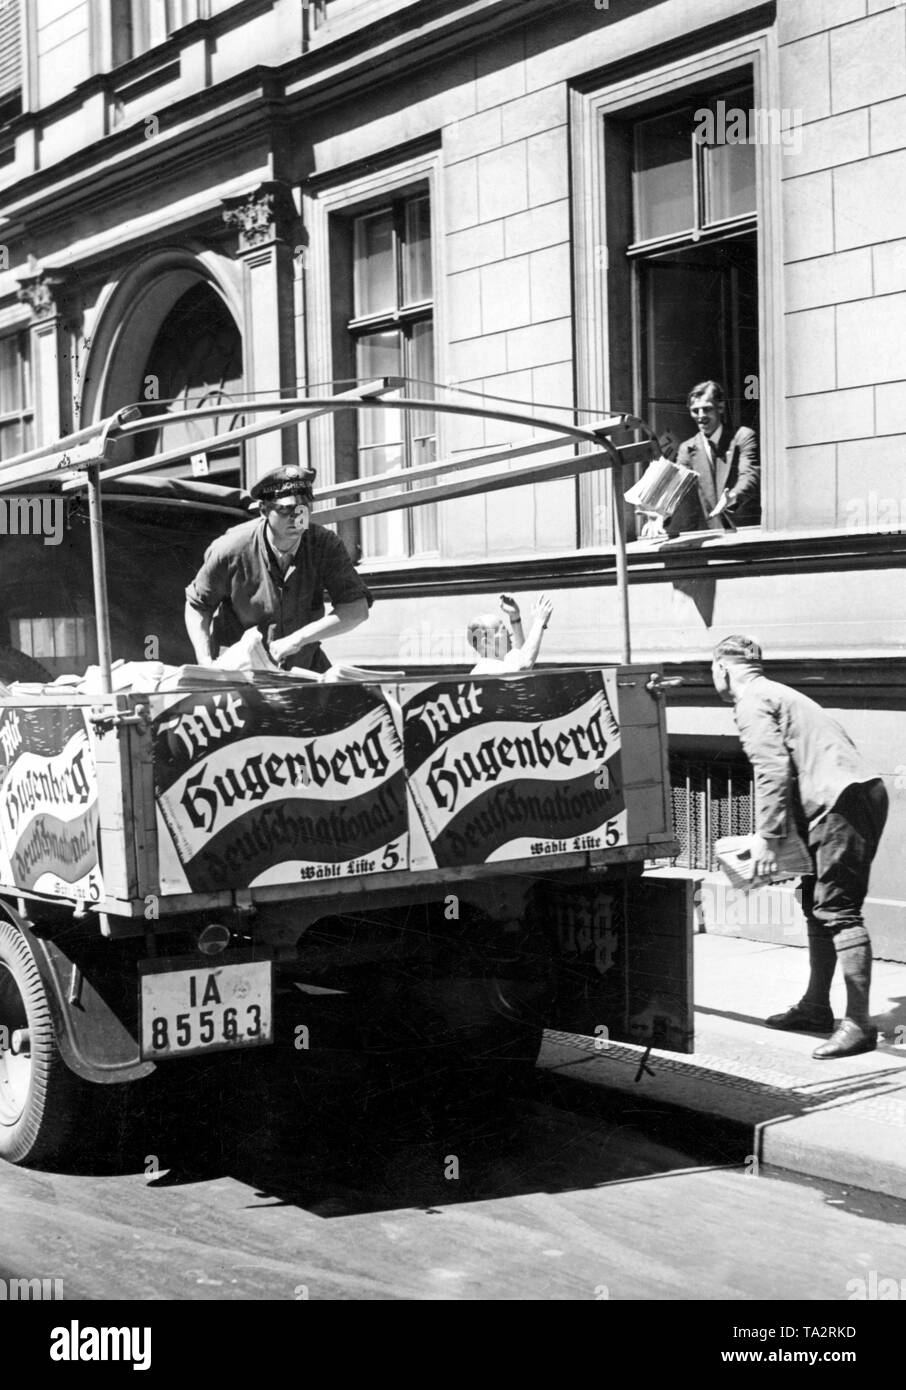 Unloading of advertising brochures for the Reichstag election in front of the office of the German National People's Party. The car is equipped with election posters, on which stands 'With Hugenberg German National!'. The Scherl Verlag provides these printed materials in large quantities. Stock Photo